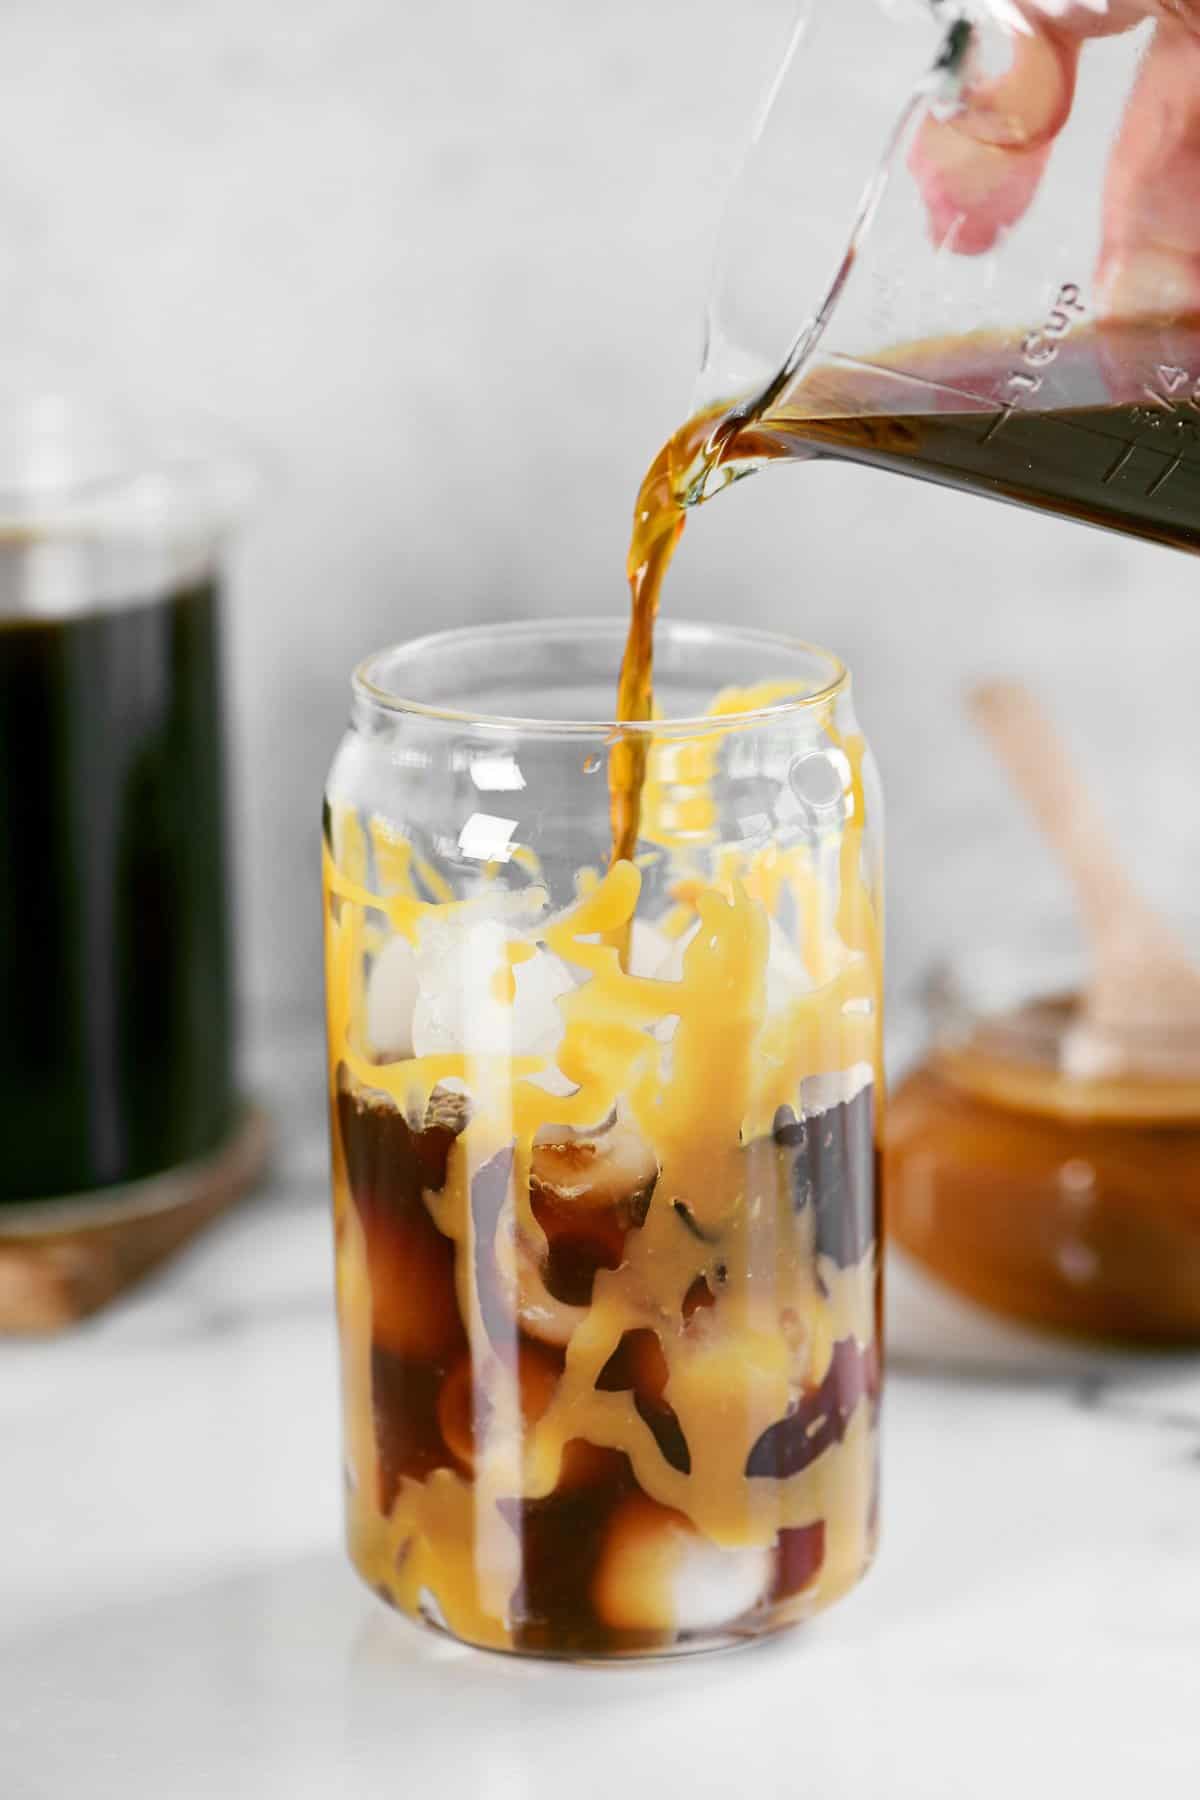 a hand pouring cold brew into a glass with caramel in it.